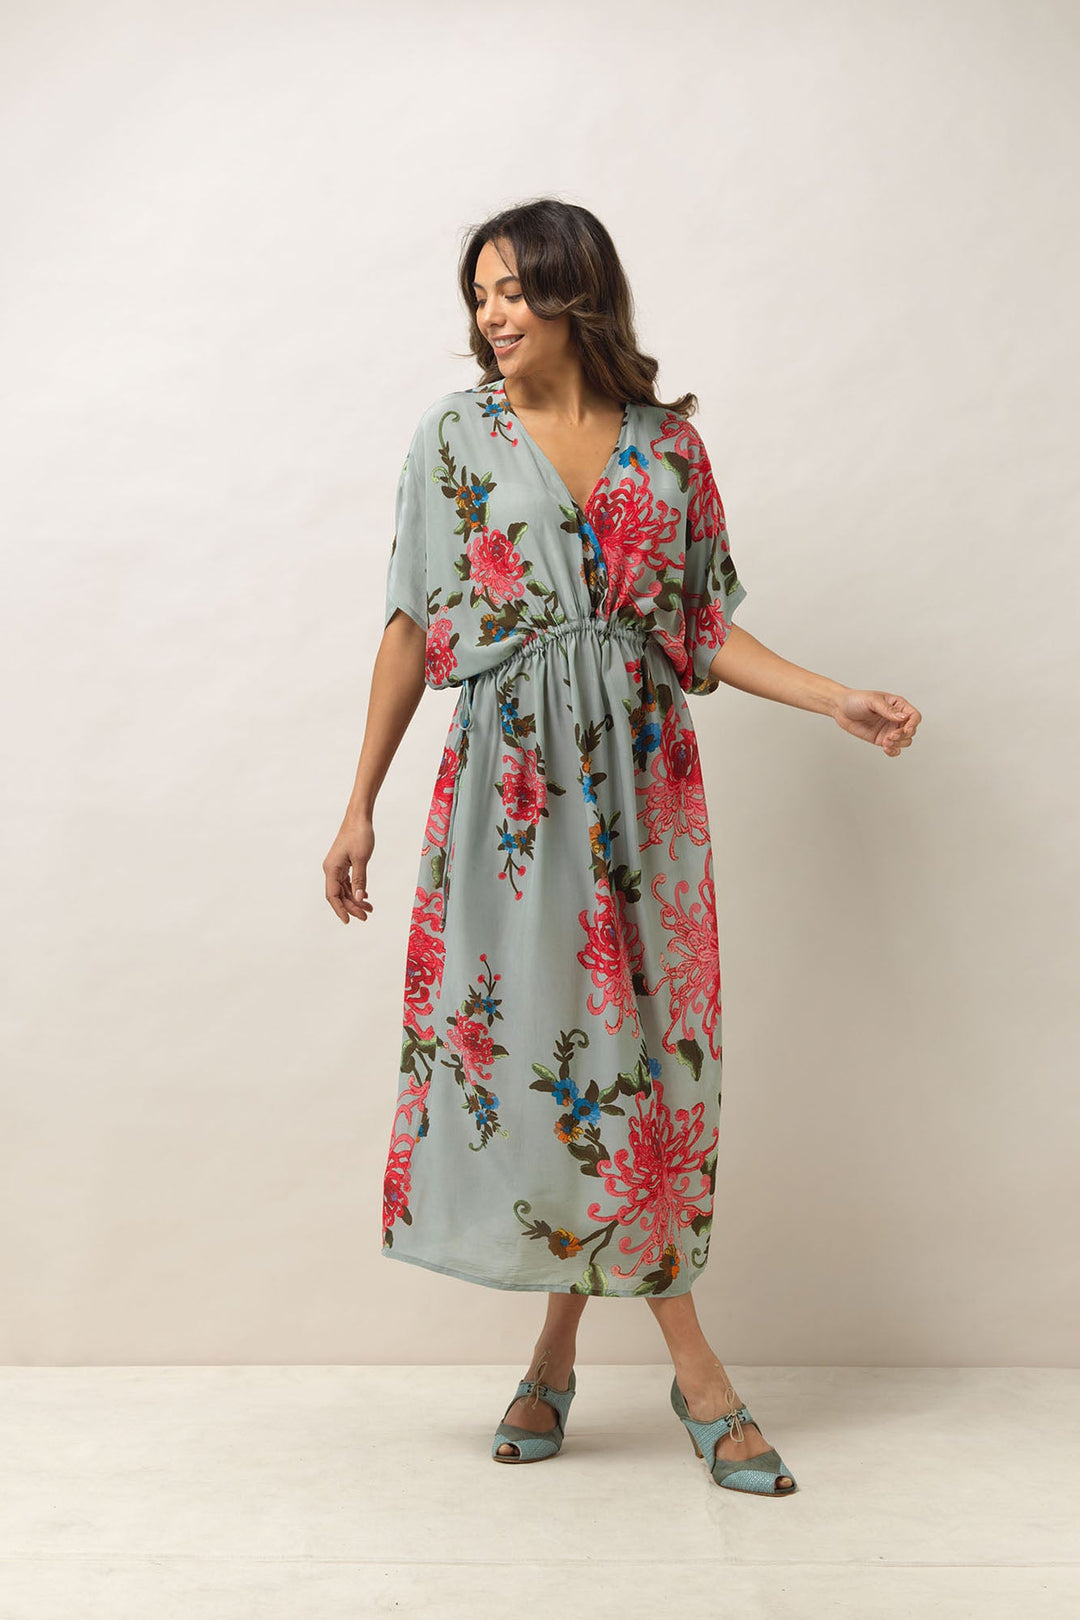 Women's lightweight beach cover up dress with tie waist in aqua with chrysanthemum print by One Hundred Stars